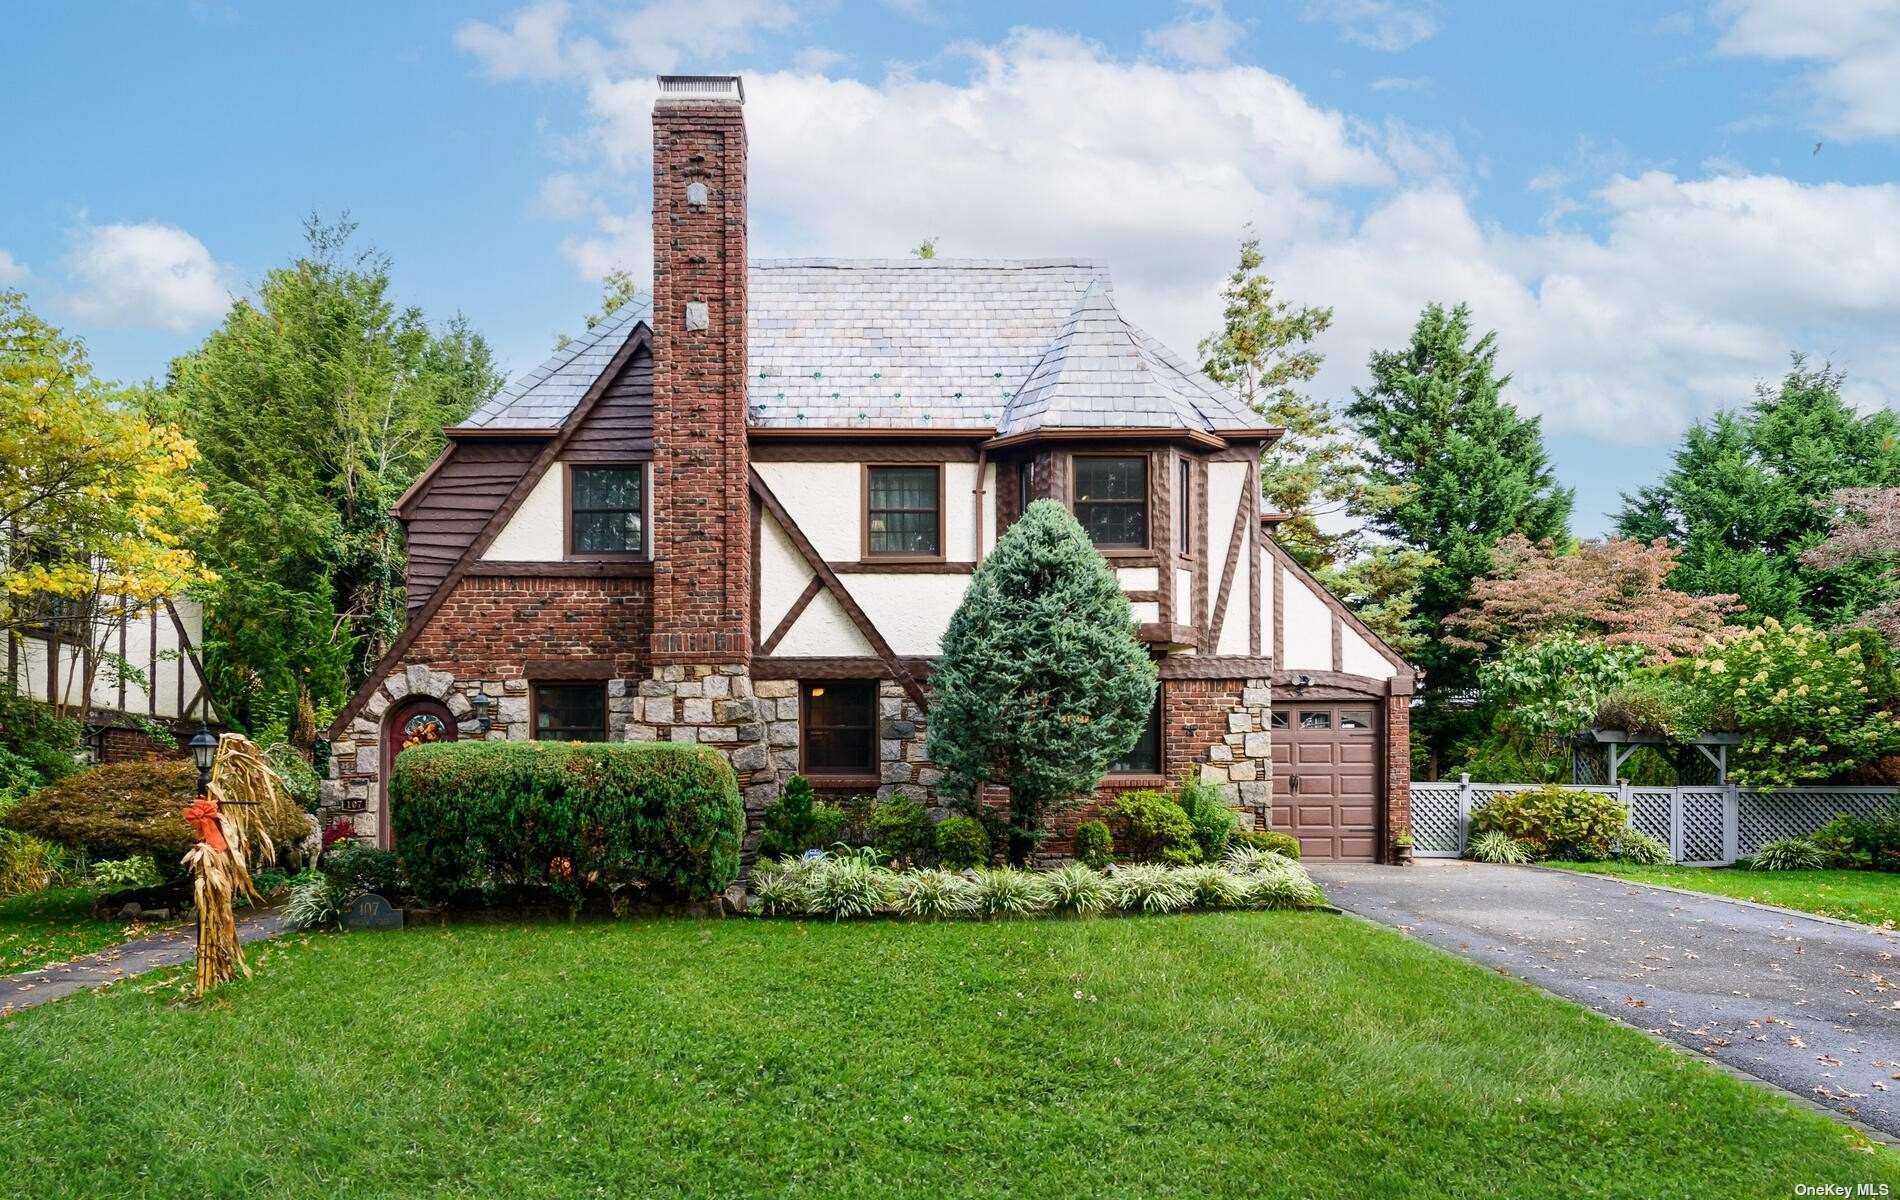 Charming 4 bedroom Tudor with great living space.